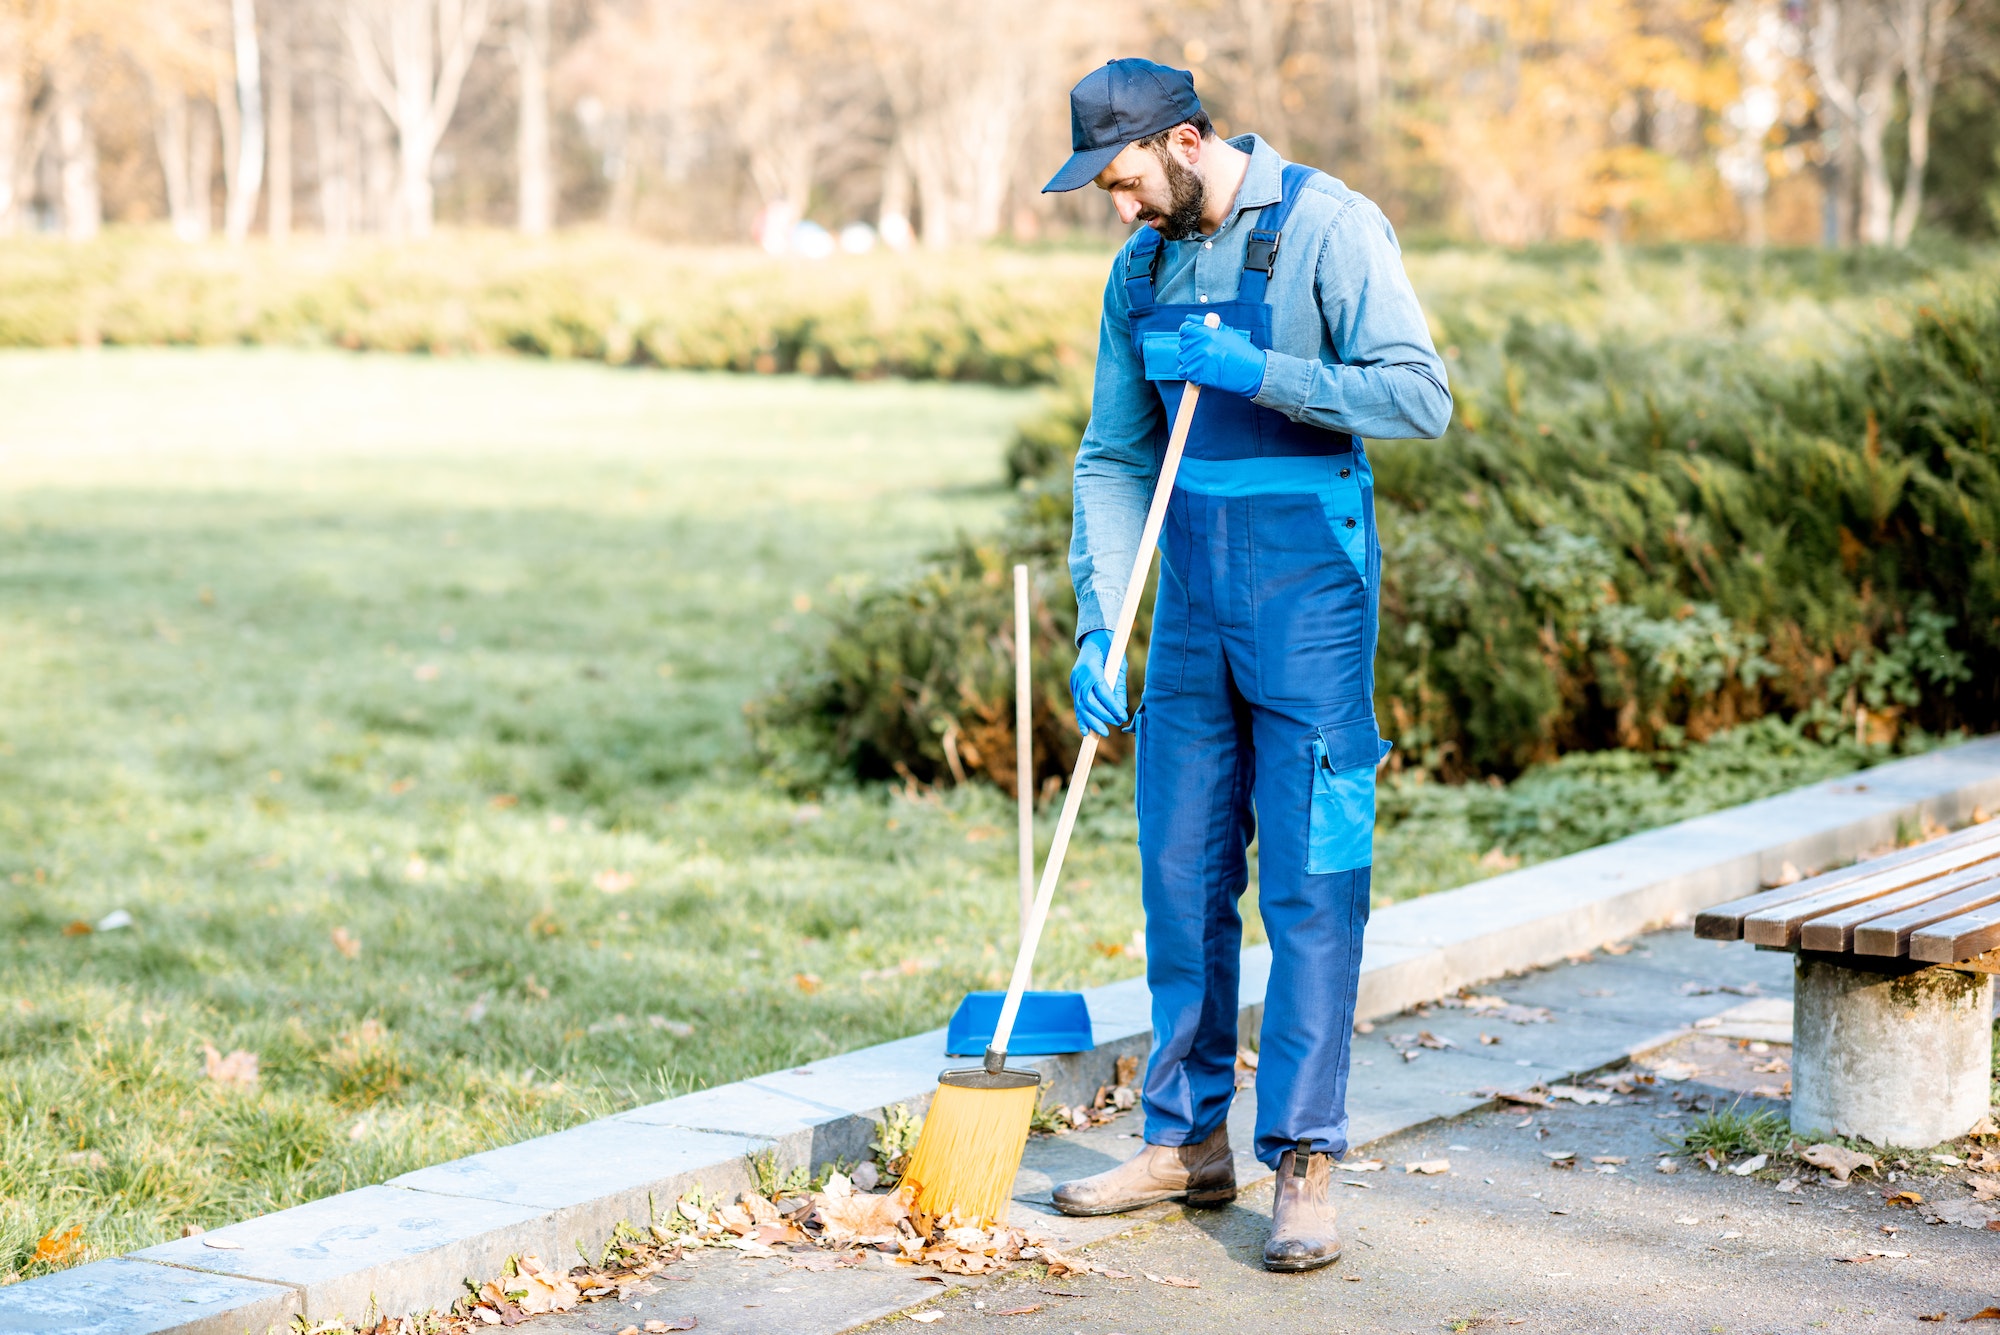 Cleaner sweeping leaves outdoors